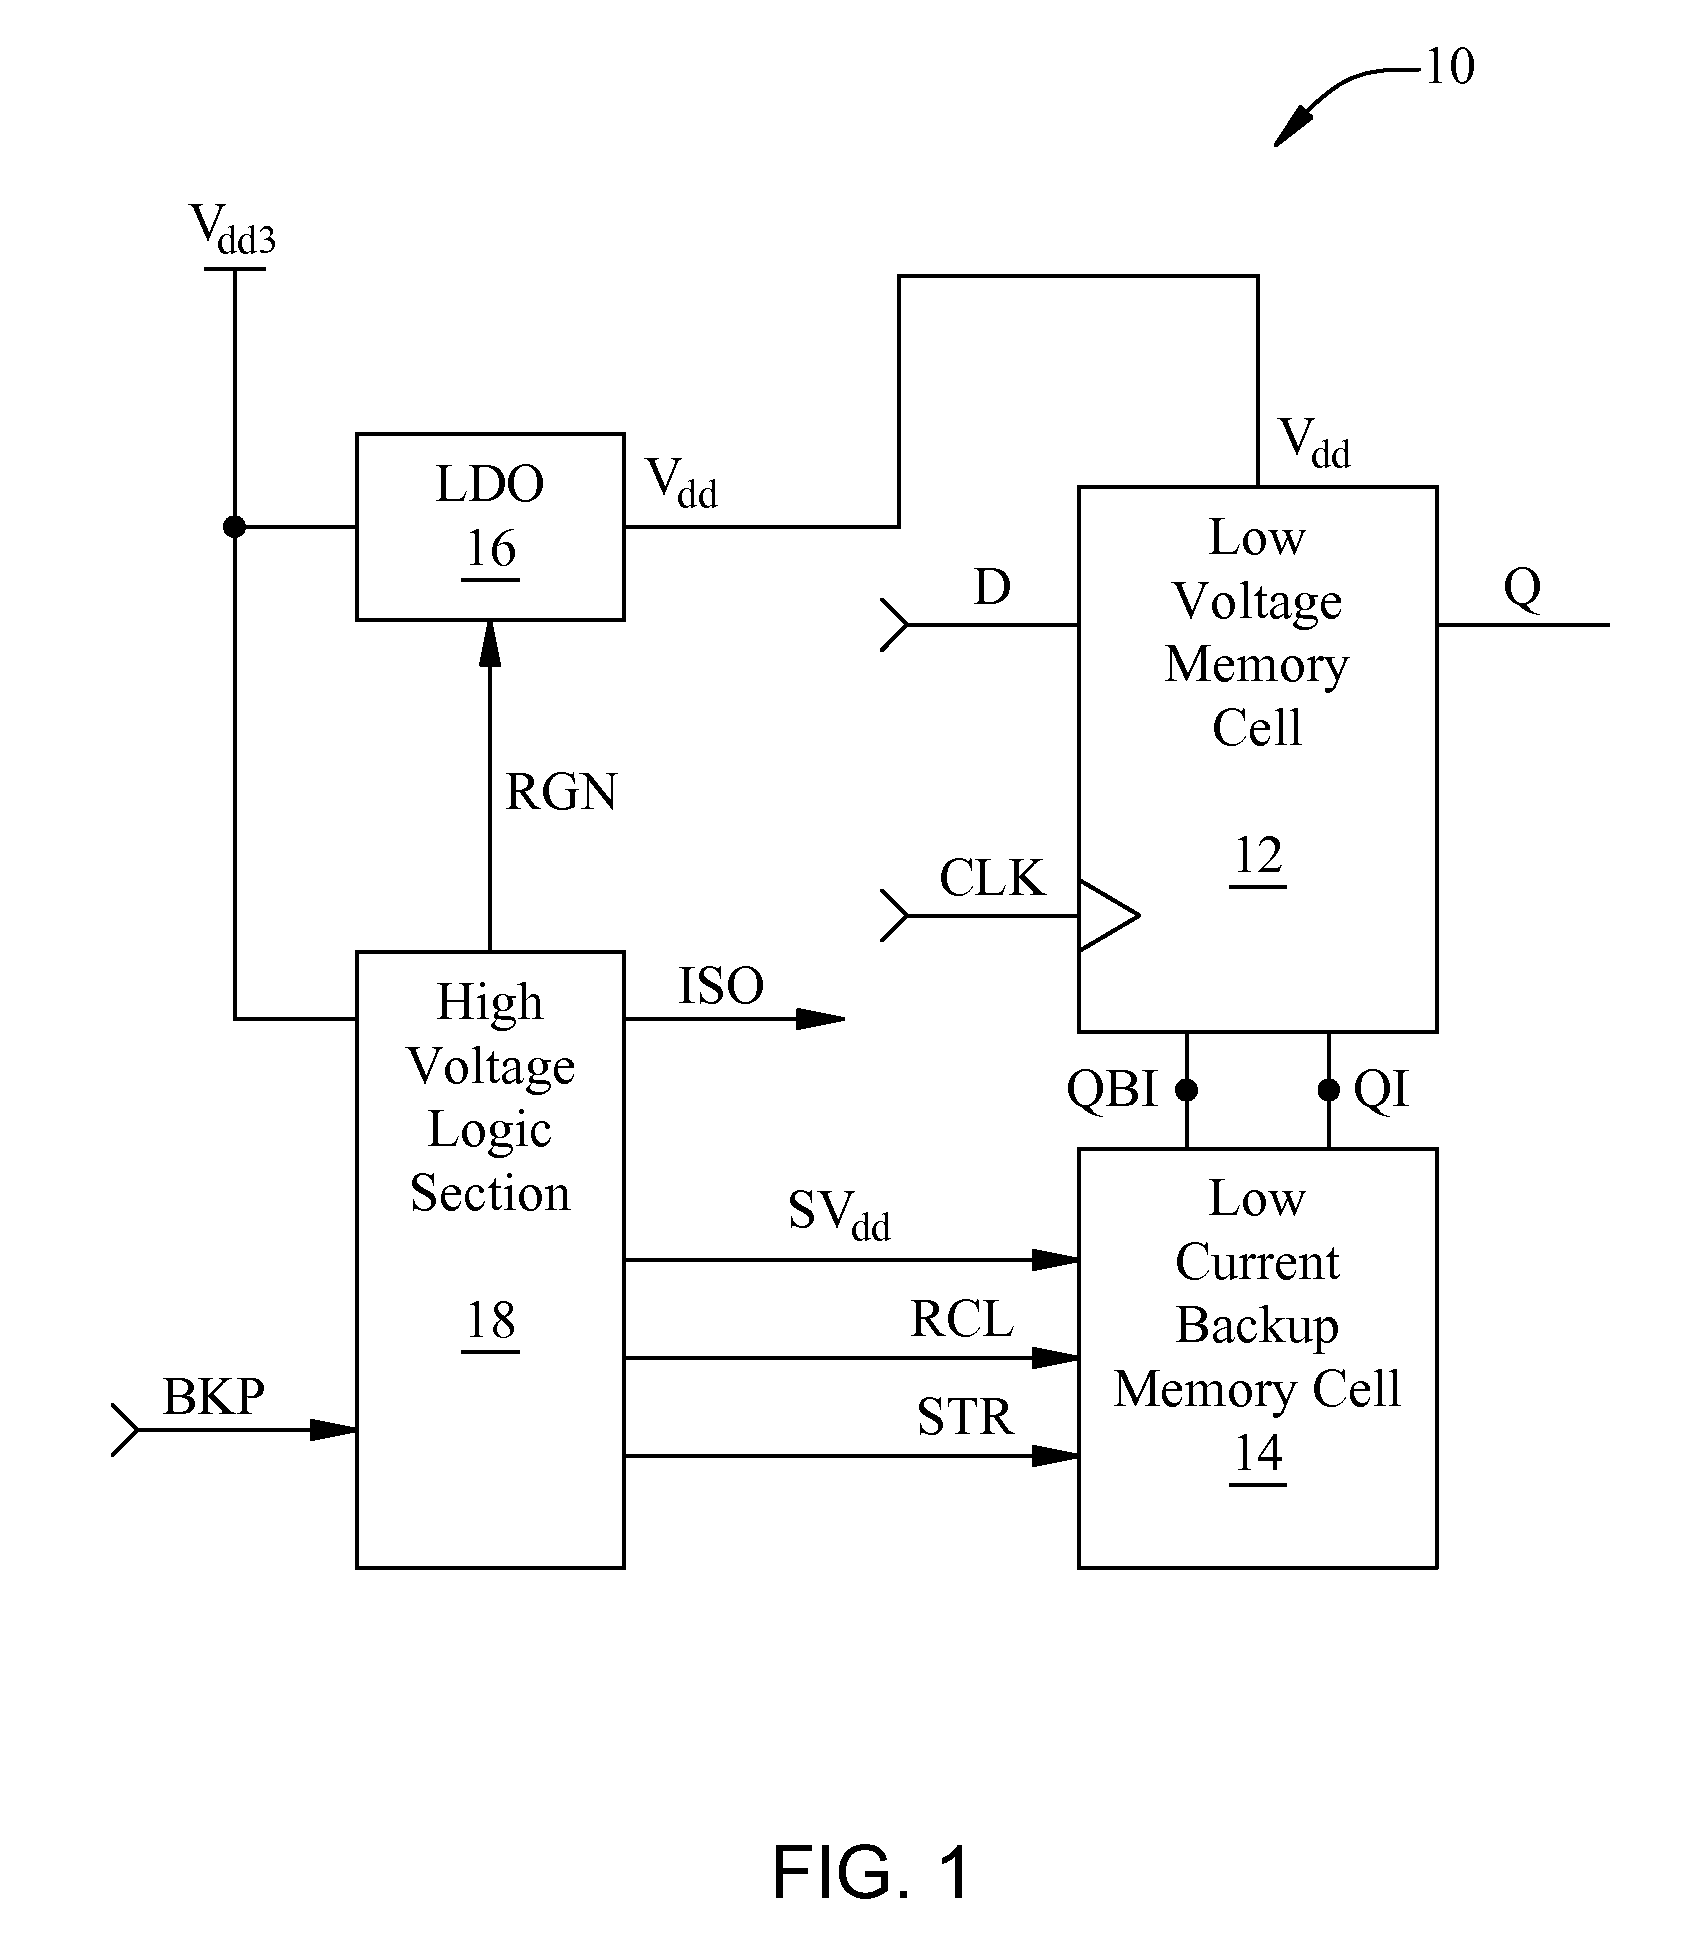 Backup for volatile state retention in the absence of primary circuit power